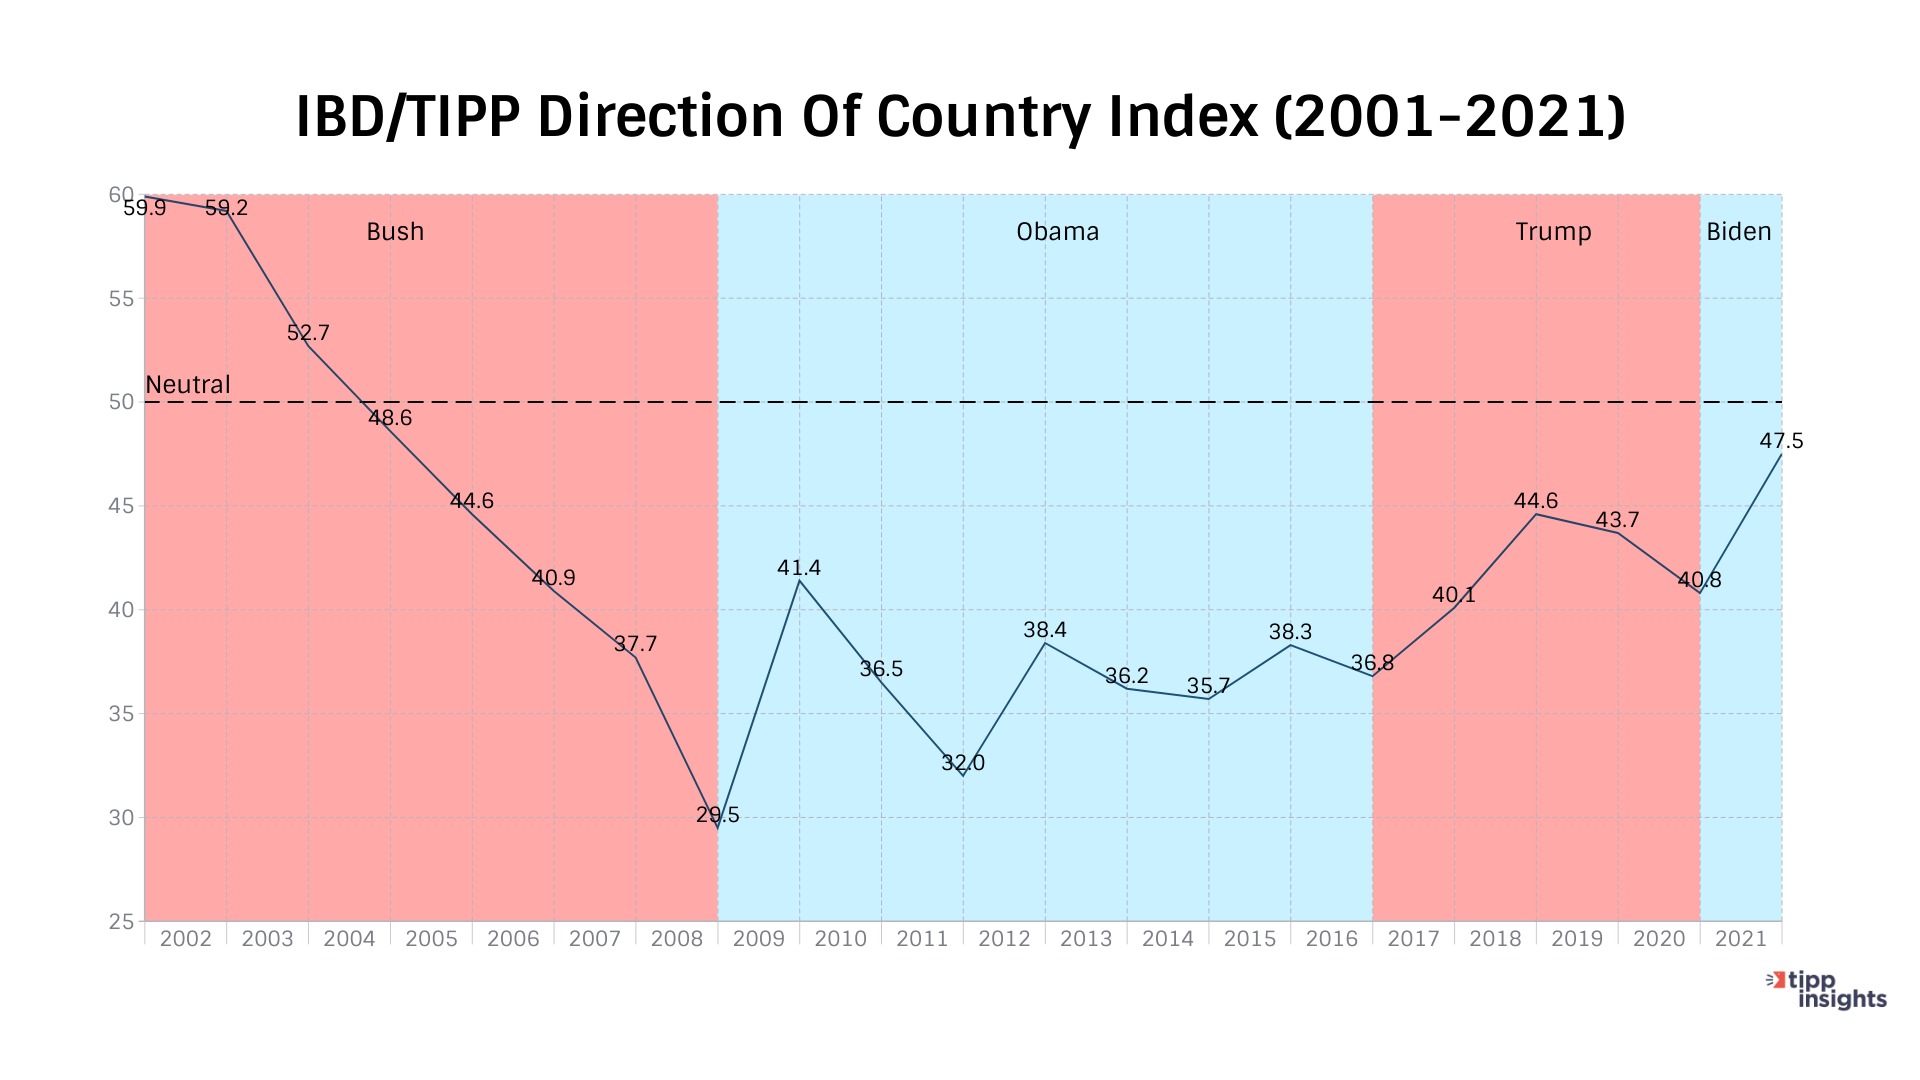 IBD/TIPP Poll Results: Direction of country index 2001-2021